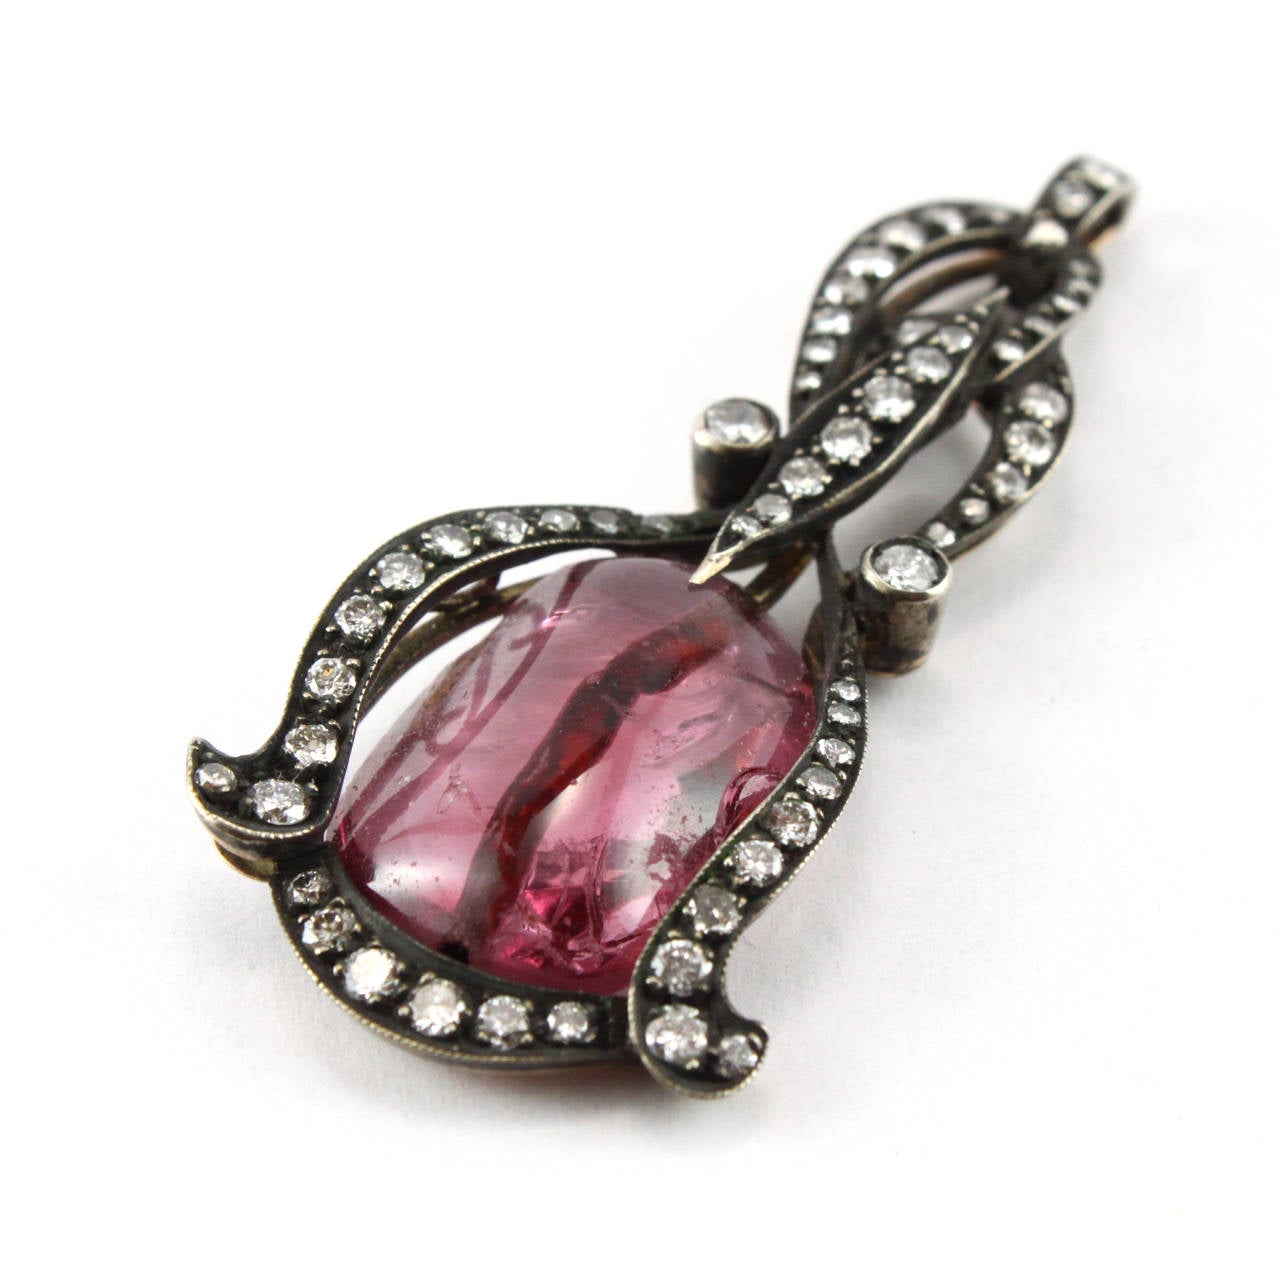 An unusual antique Rubellite Tourmaline bead, mounted in a Victorian pendant with ca. 2 carats of round diamonds.